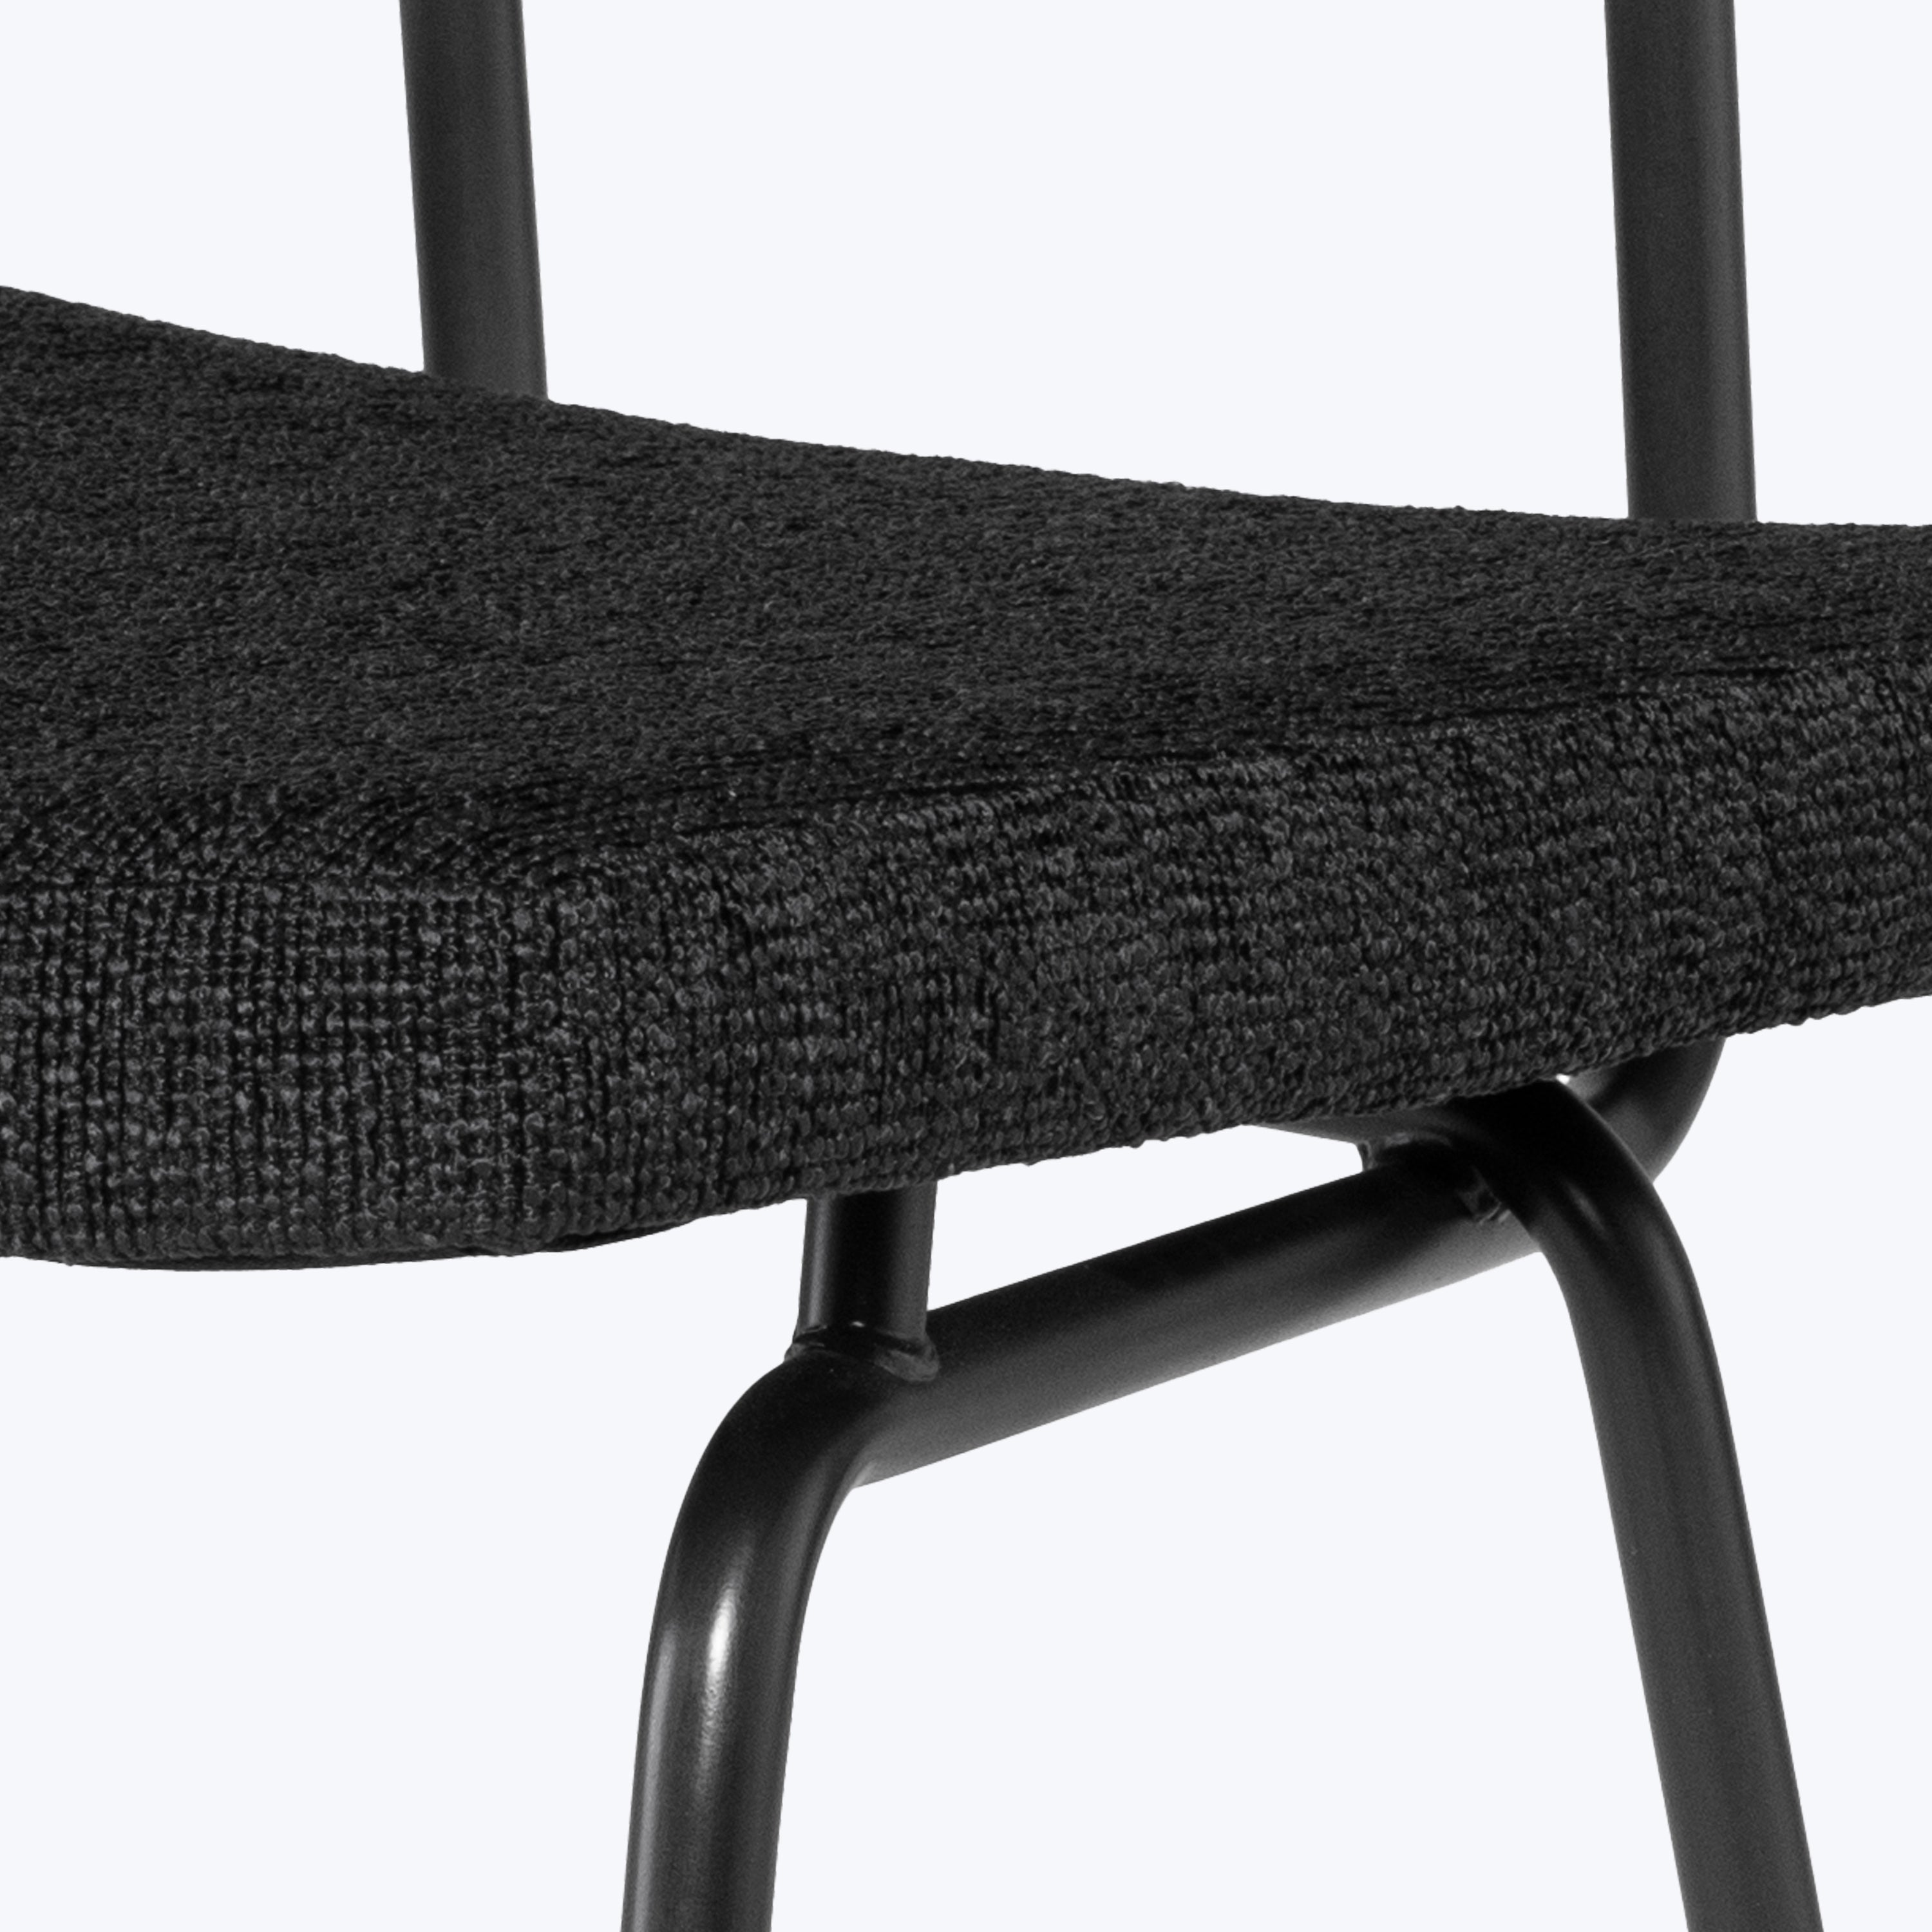 Soli Stool Bar Stool / Activated Charcoal